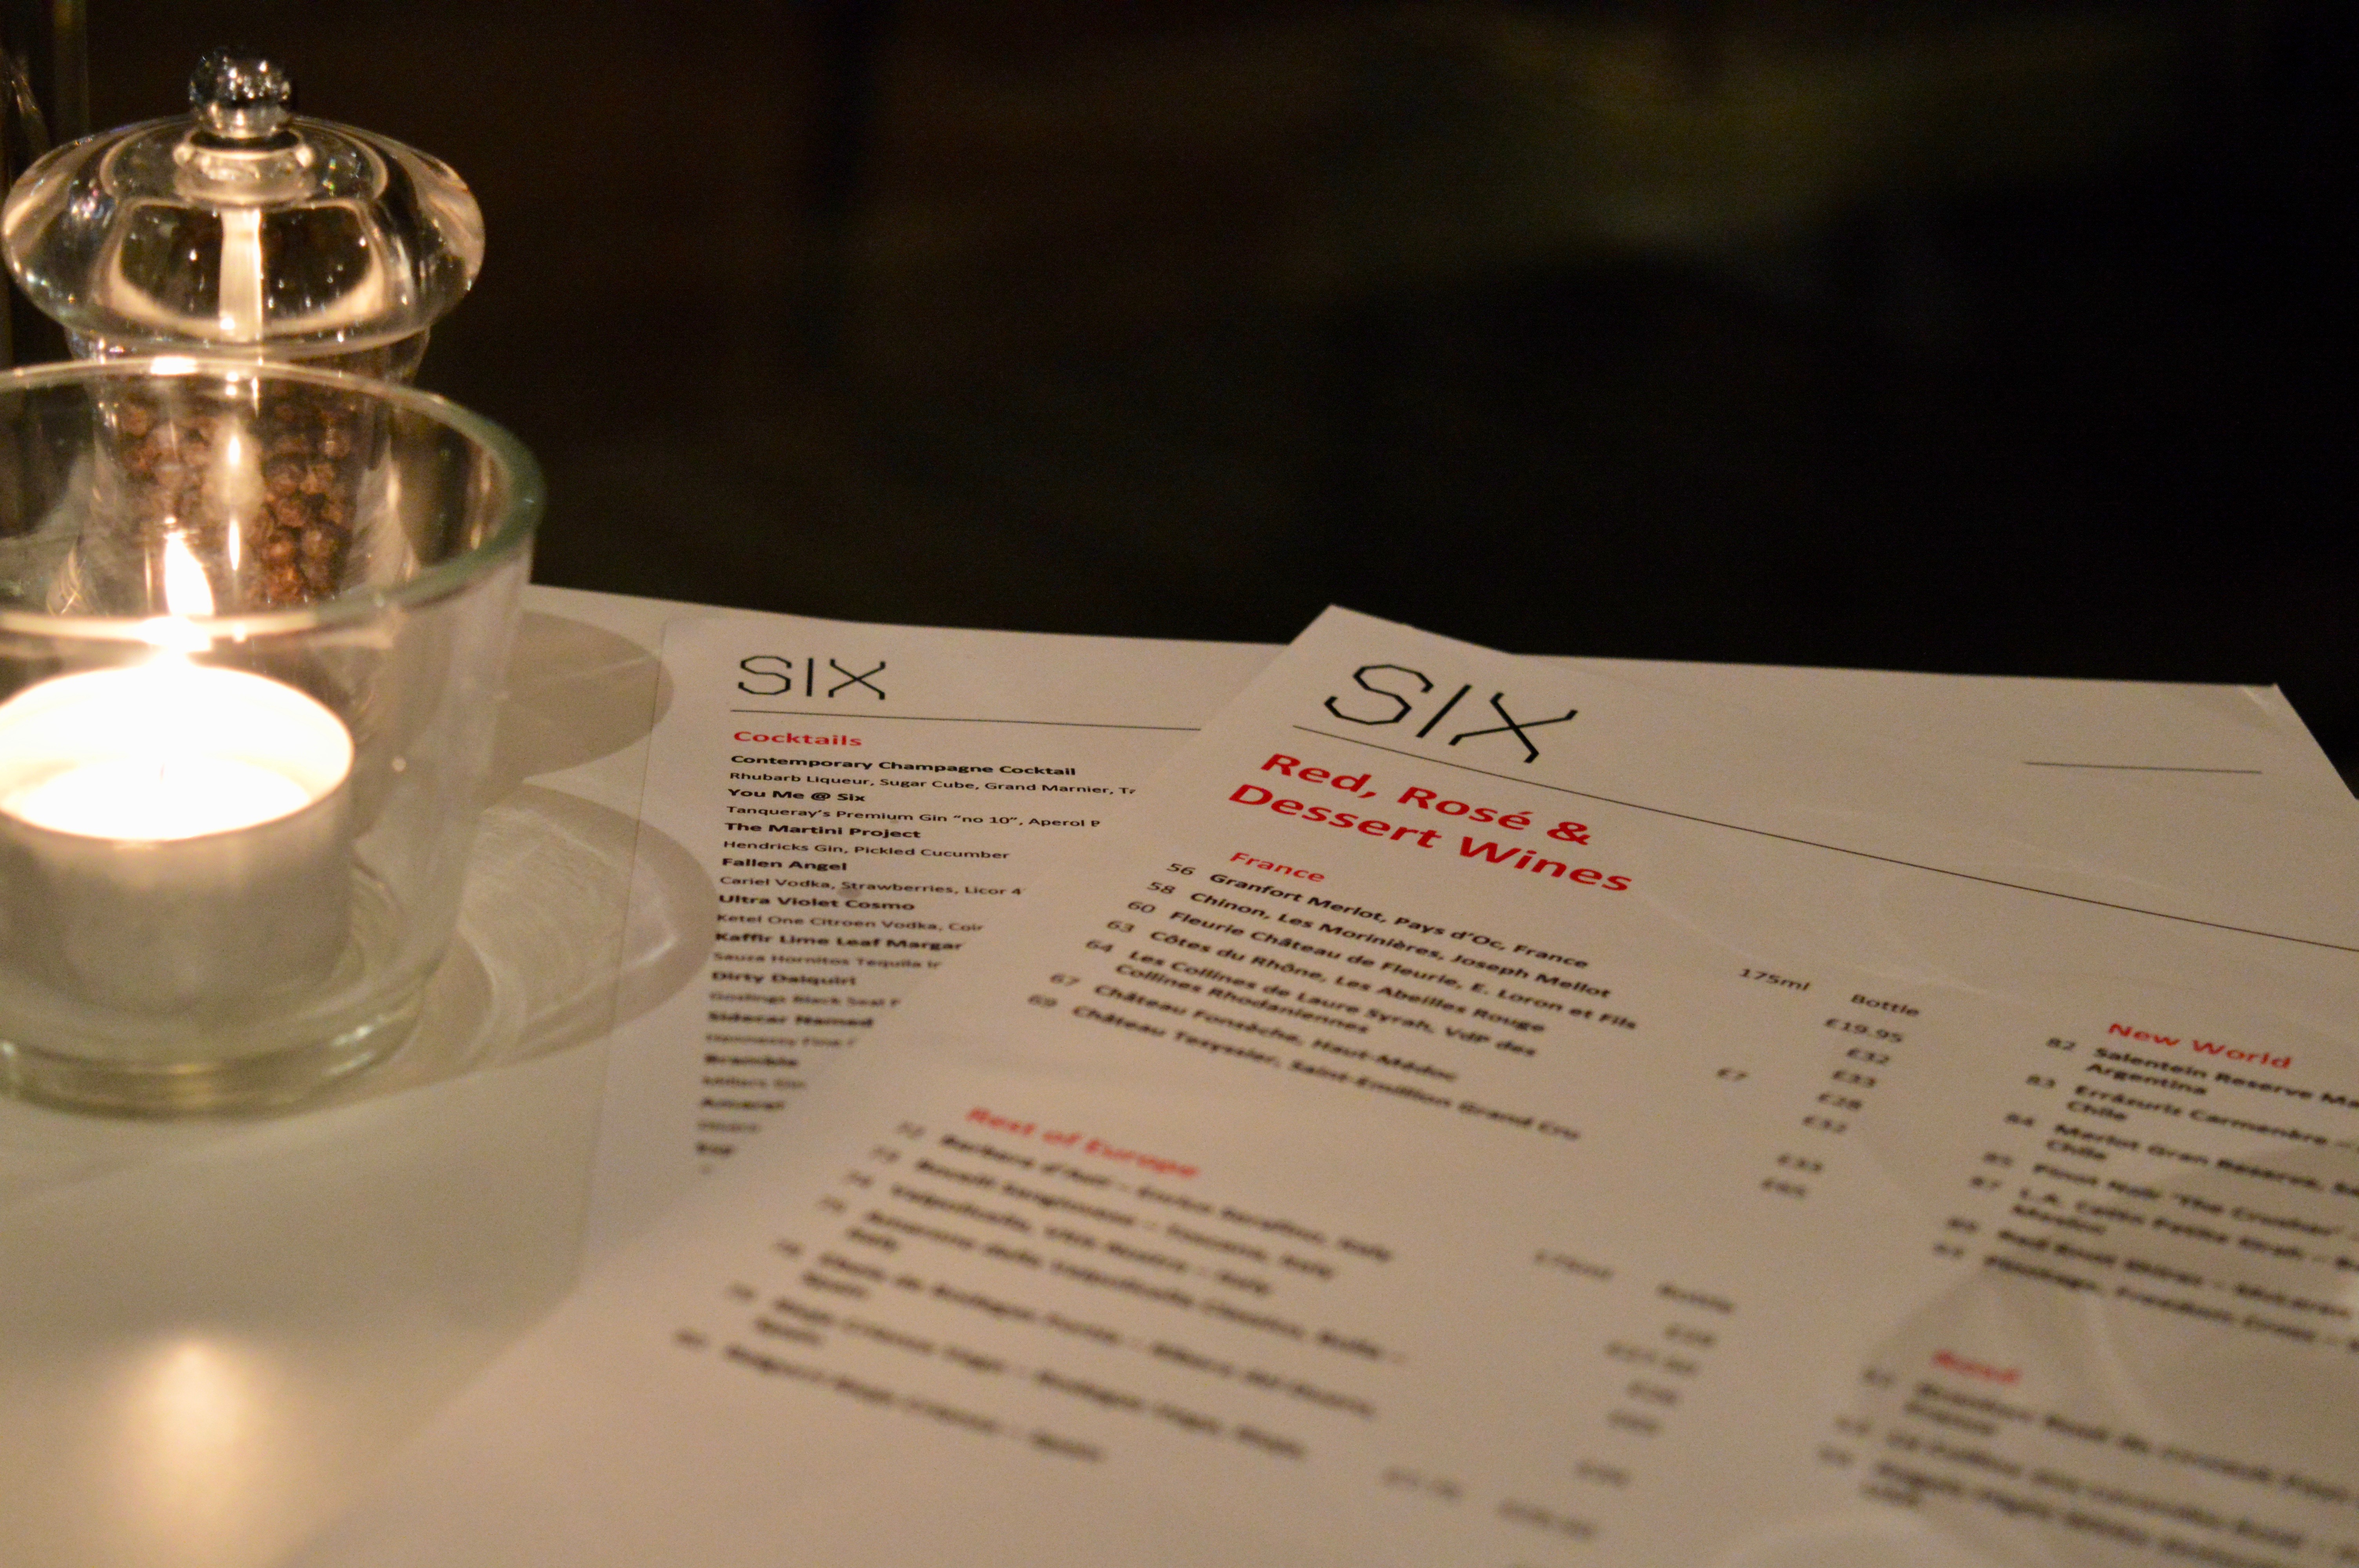 Six at The Baltic Gateshead | Views of Newcastle | Food & Drink Review | Dining Out Recommendations | Elle Blonde Luxury Lifestyle Destination Blog